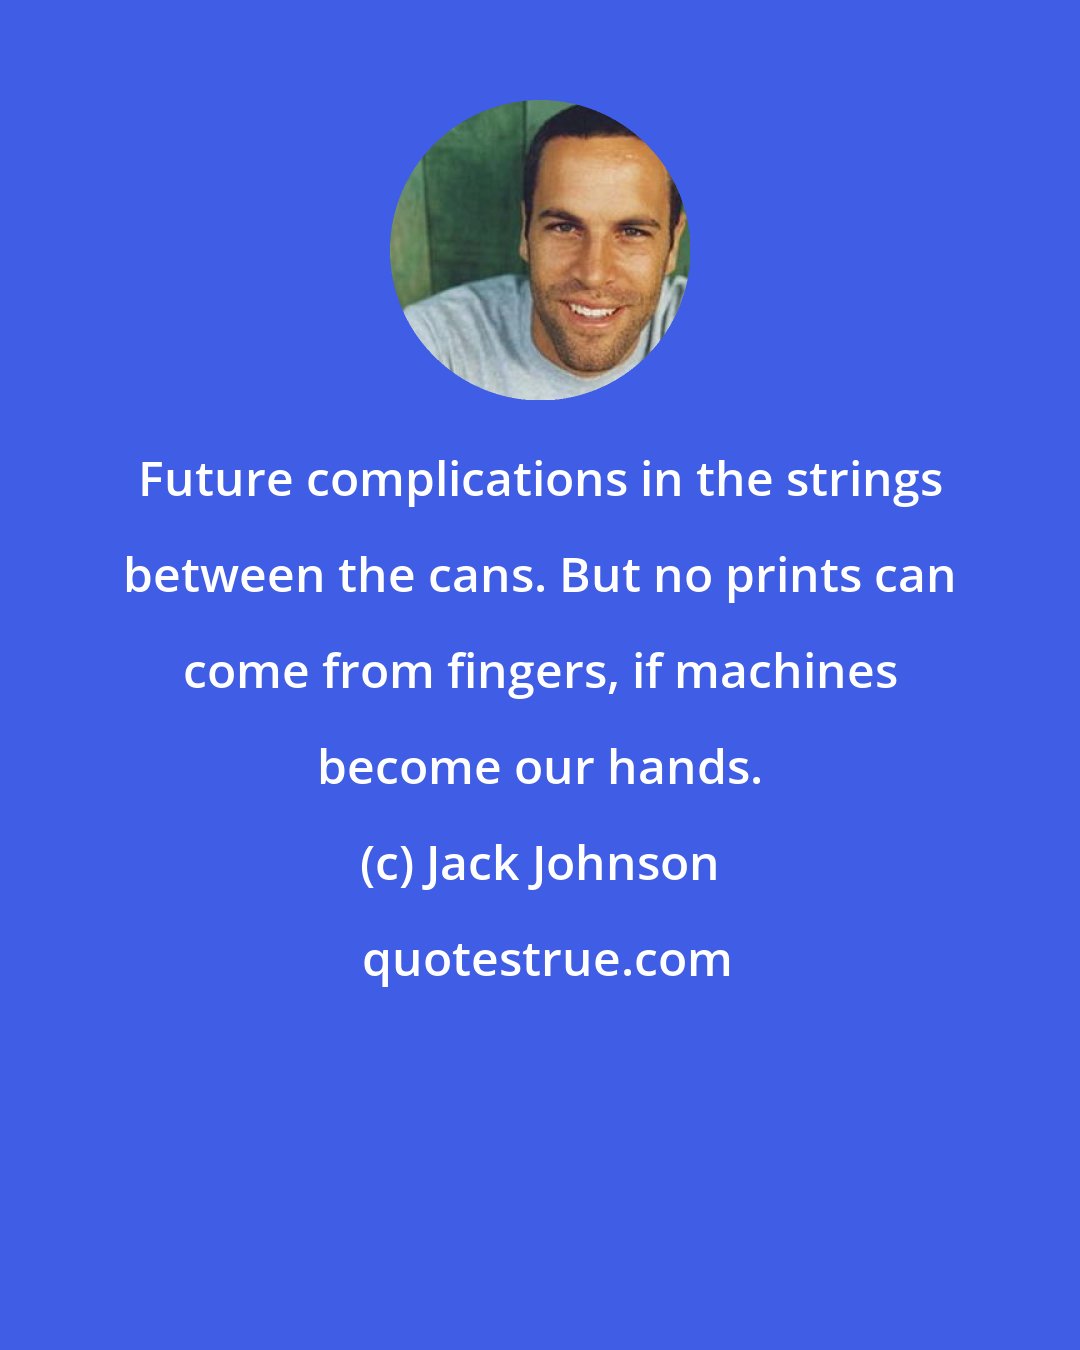 Jack Johnson: Future complications in the strings between the cans. But no prints can come from fingers, if machines become our hands.